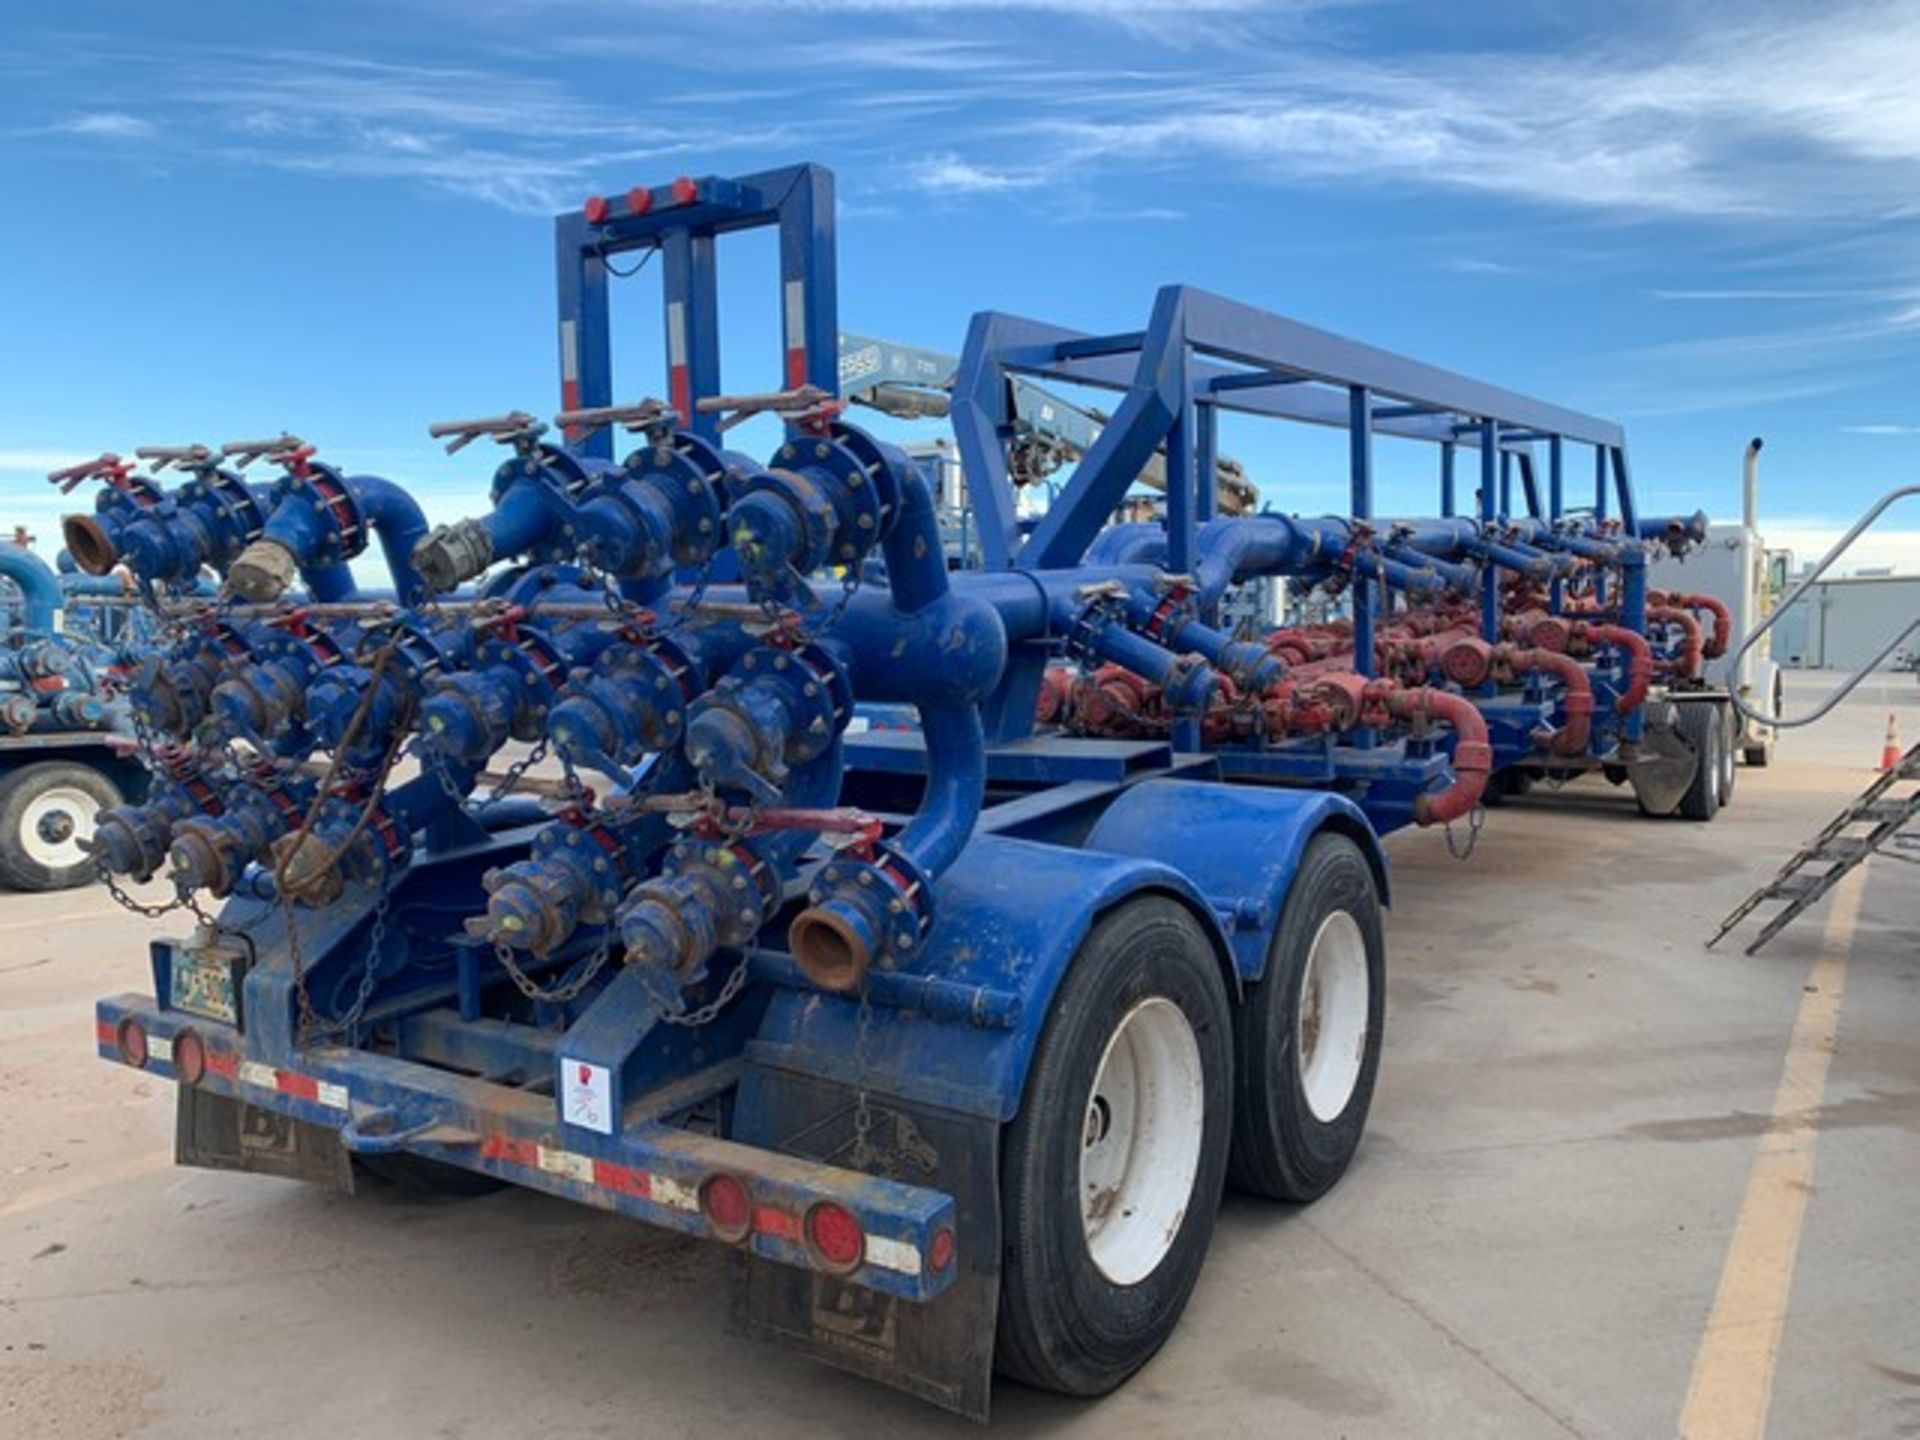 Located in YARD 2 - Odessa, TX (FIF045) 2011 WORLEY T/A 10 STATION SPM IRON MANIFOLD TRAILER, VIN- - Image 2 of 4